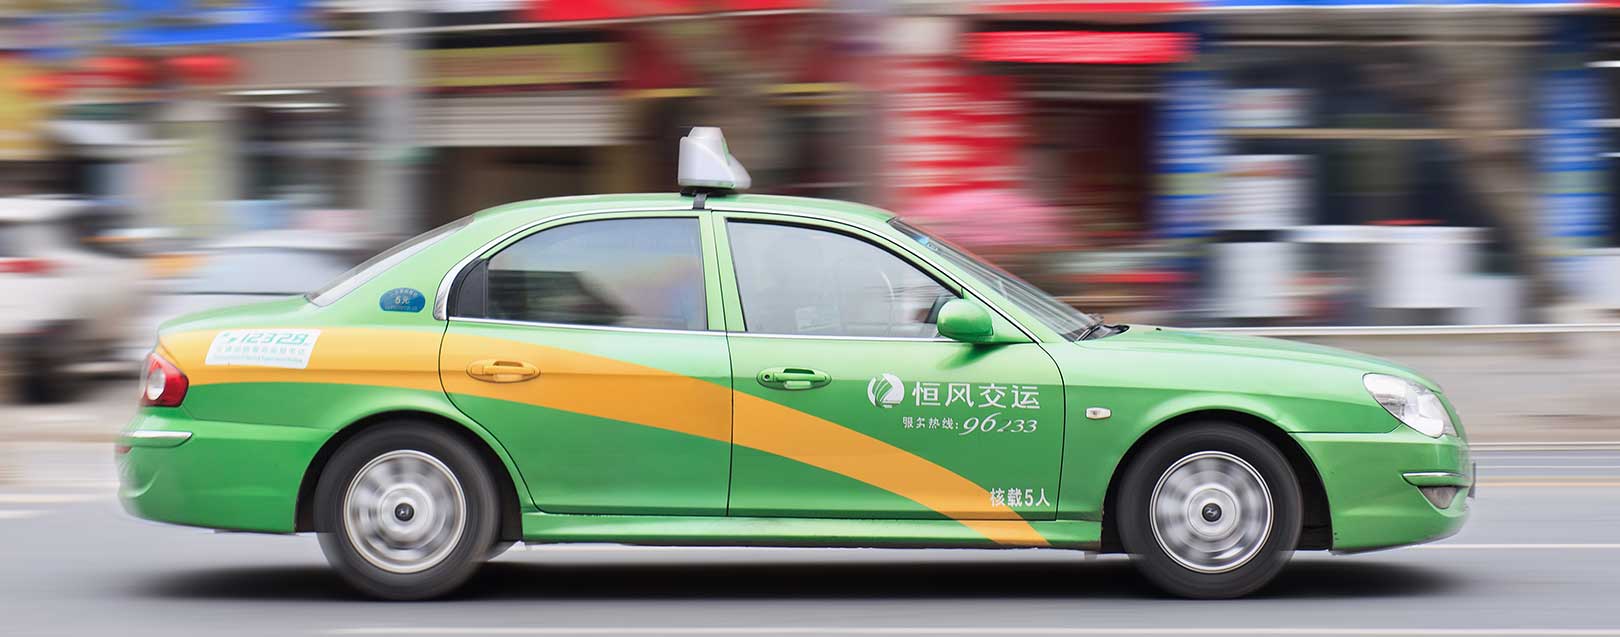 Apple invests $1 bn in China's taxi hailing app Didi